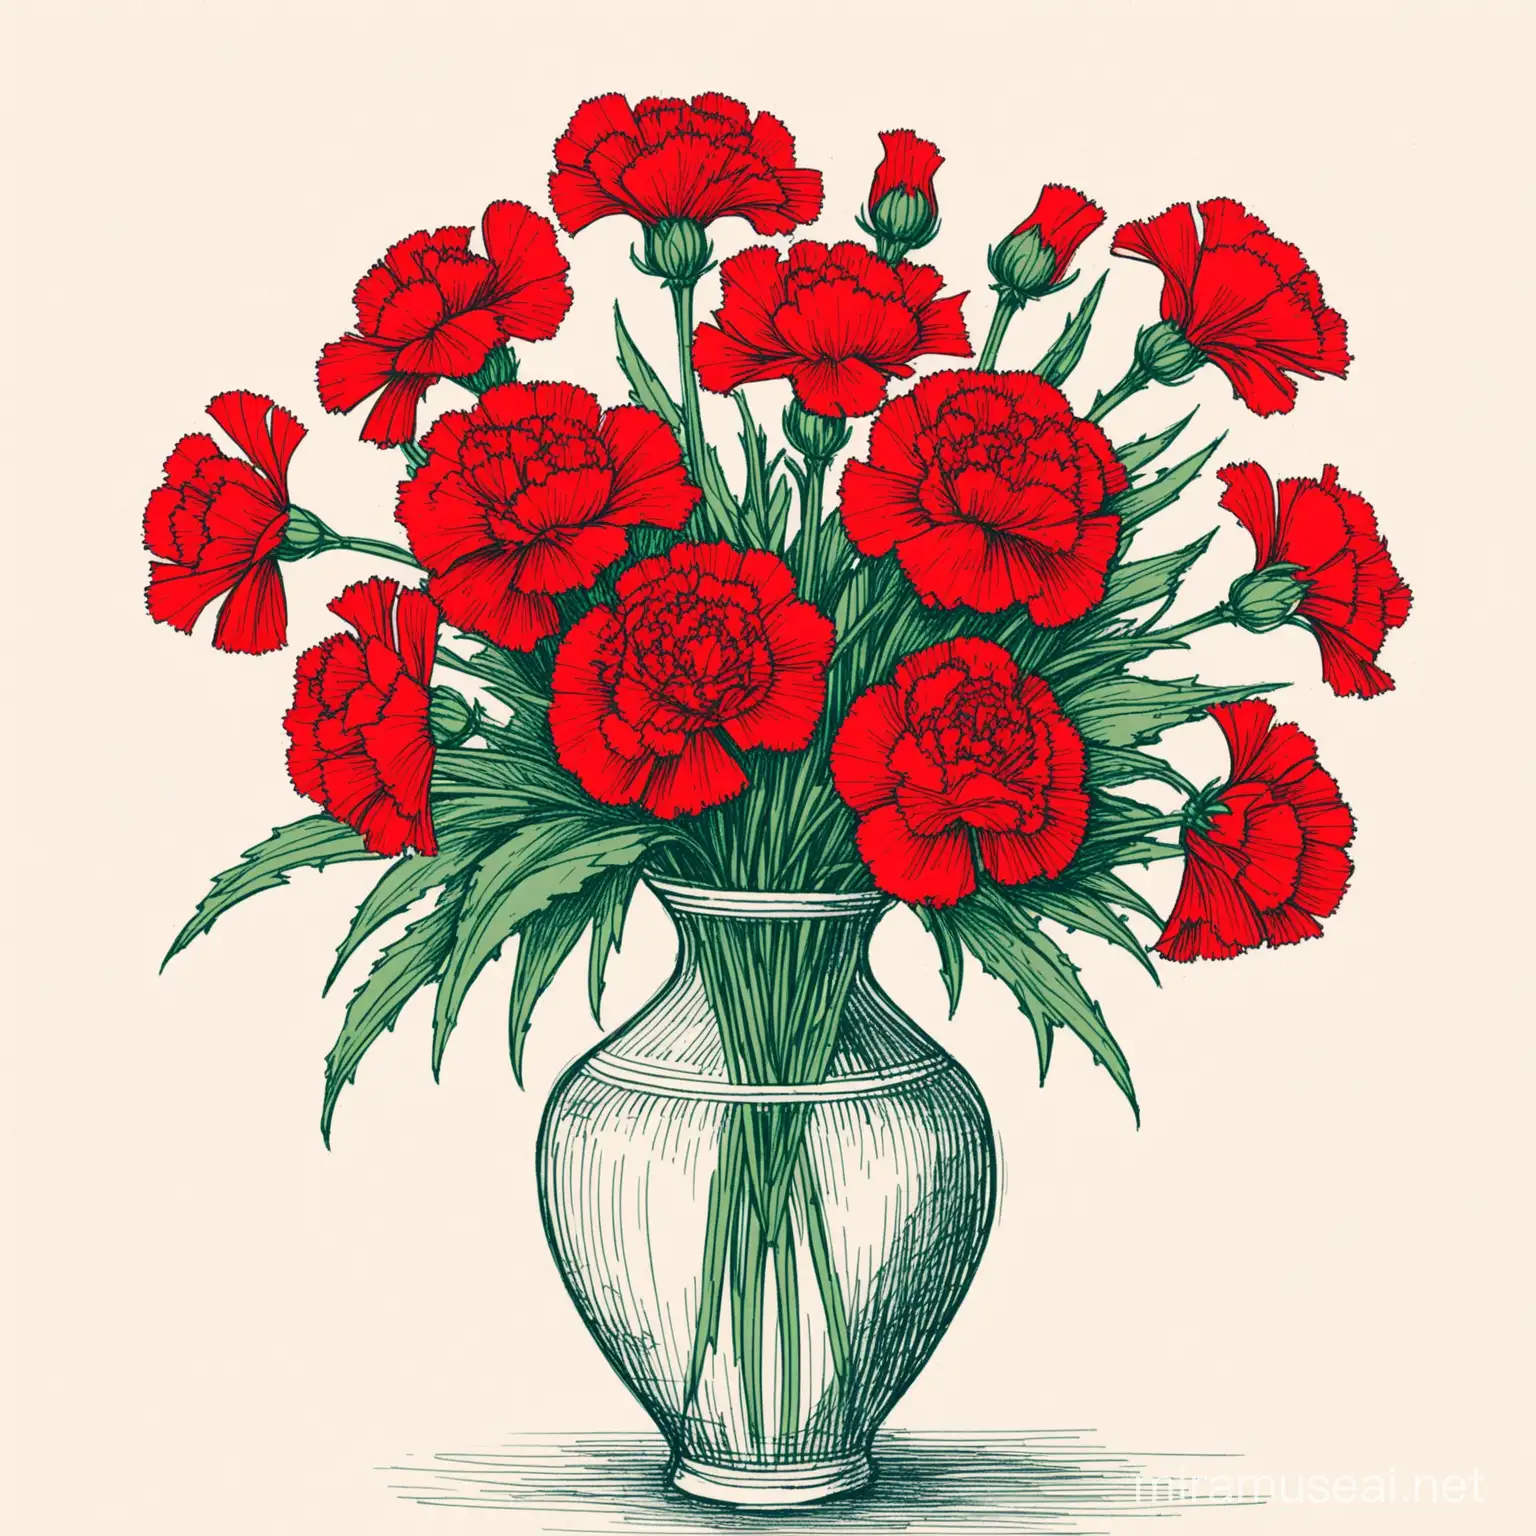 Floral Still Life Vibrant Red Carnations in a Classic Vase